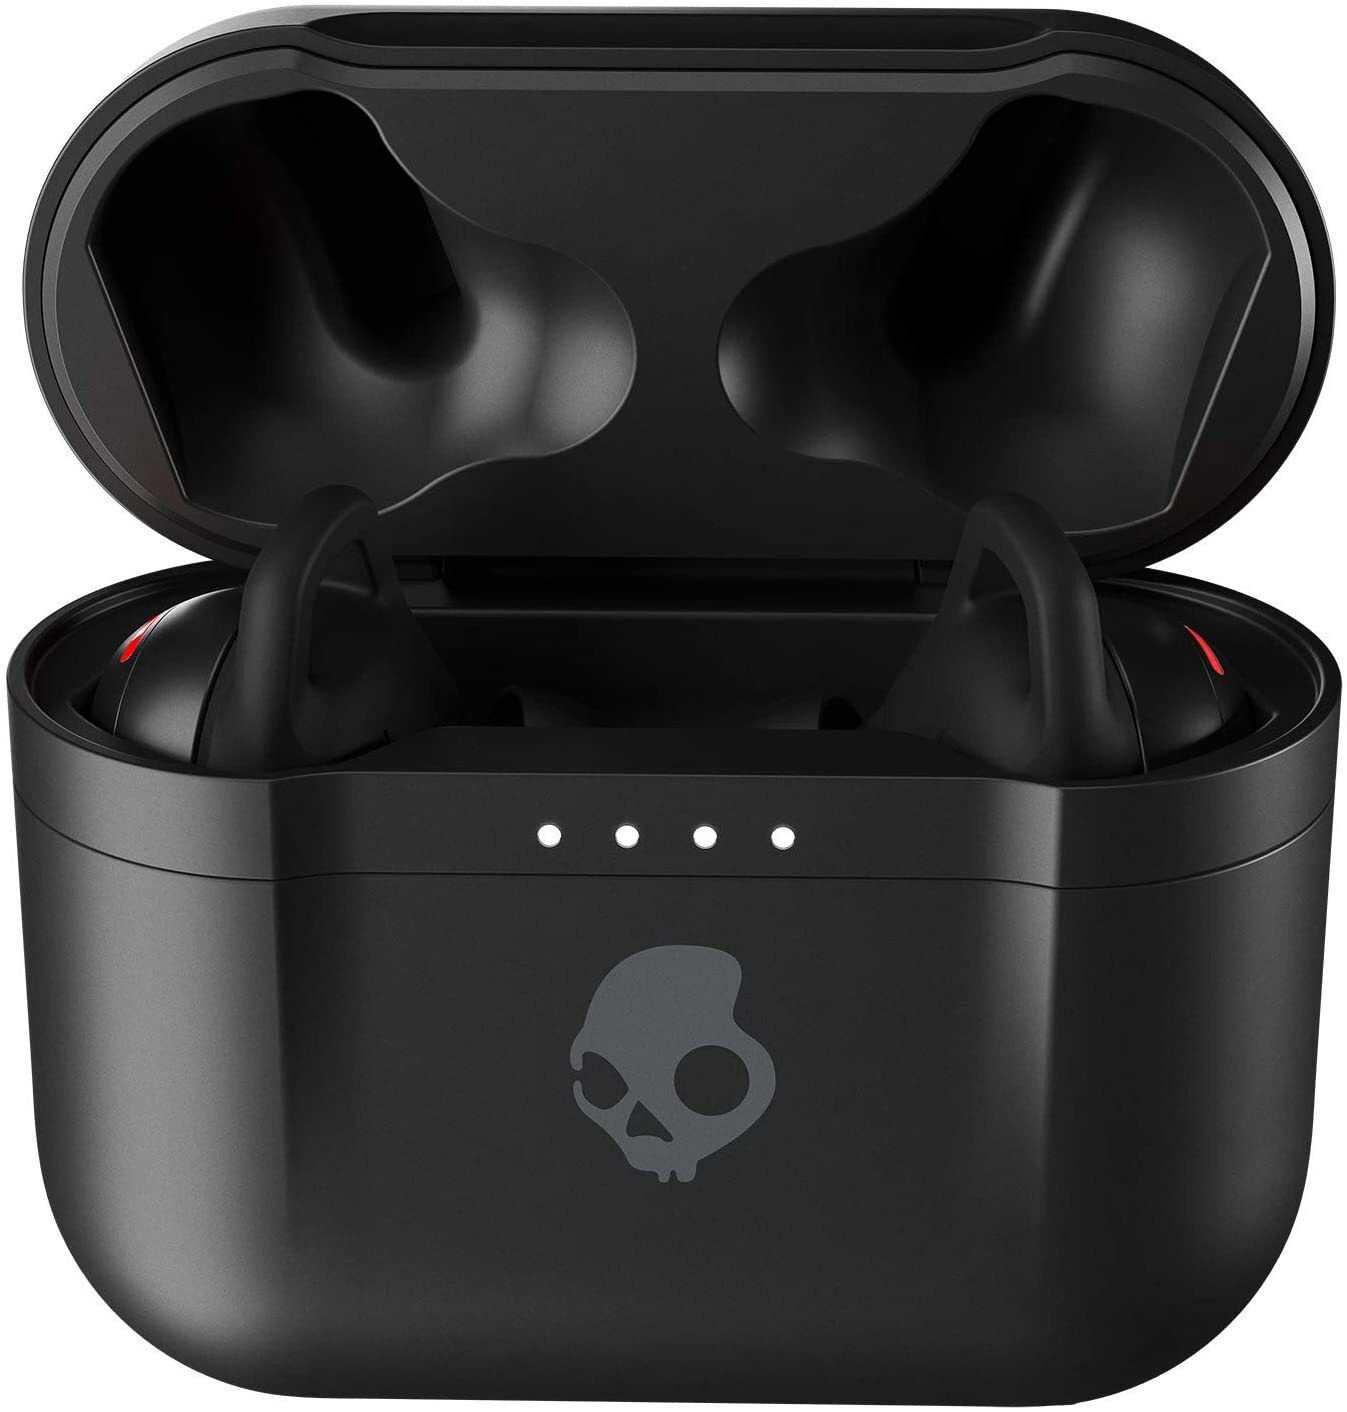 Skullcandy+Indy+Fuel+Model+S21FW+Wireless+REPLACEMENT+CHARGING+